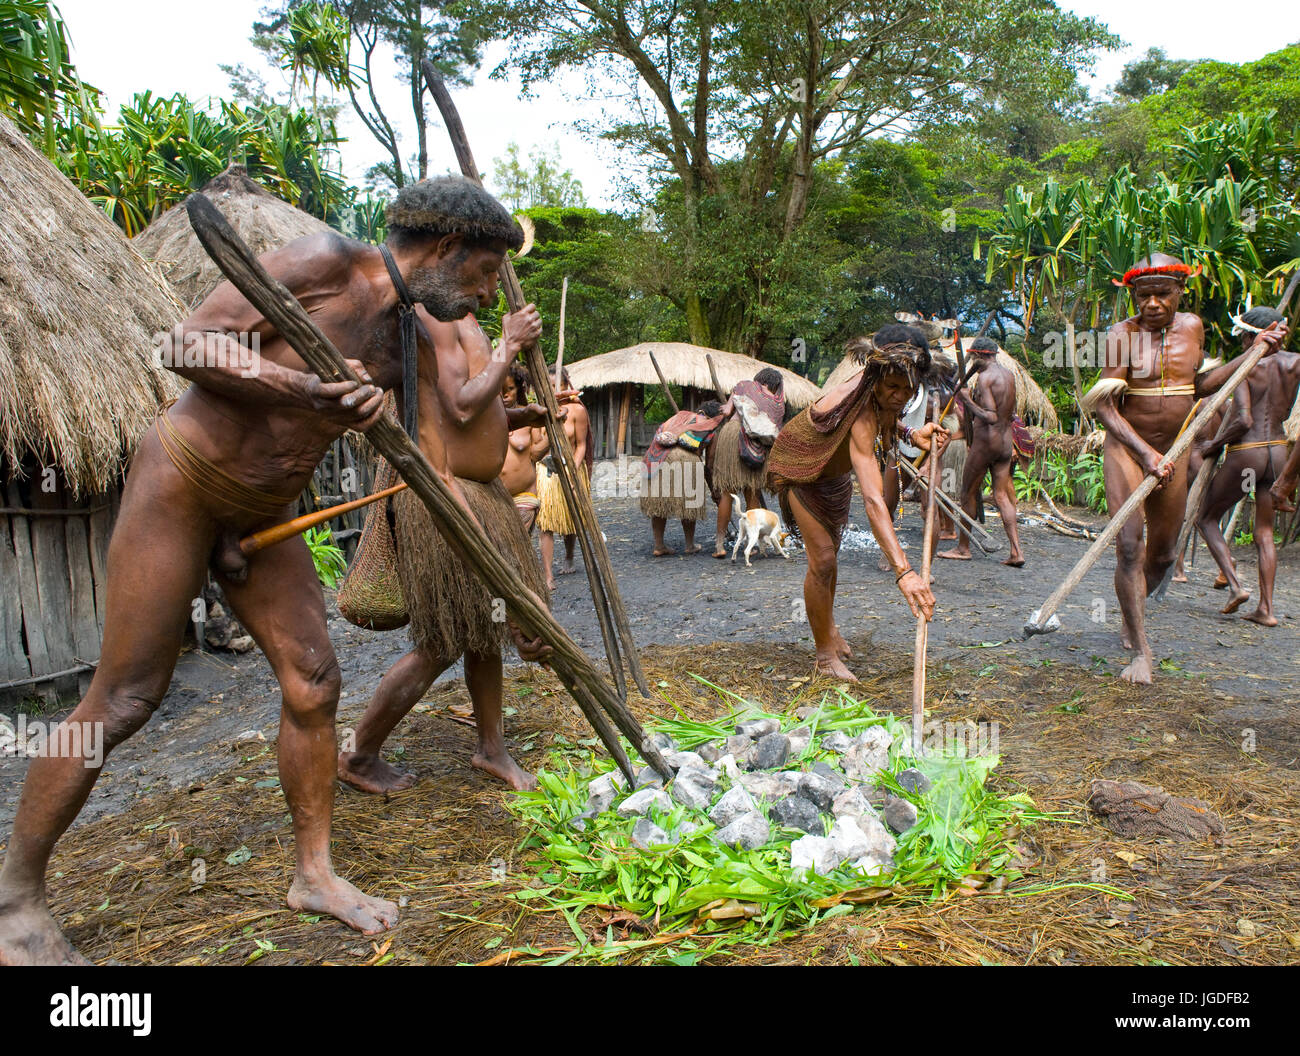 DANI VILLAGE, WAMENA, IRIAN JAYA, NEW GUINEA, INDONESIA – 25 JULY 2009: Men Dani tribe in the village are the hot stones for cooking meat. Stock Photo